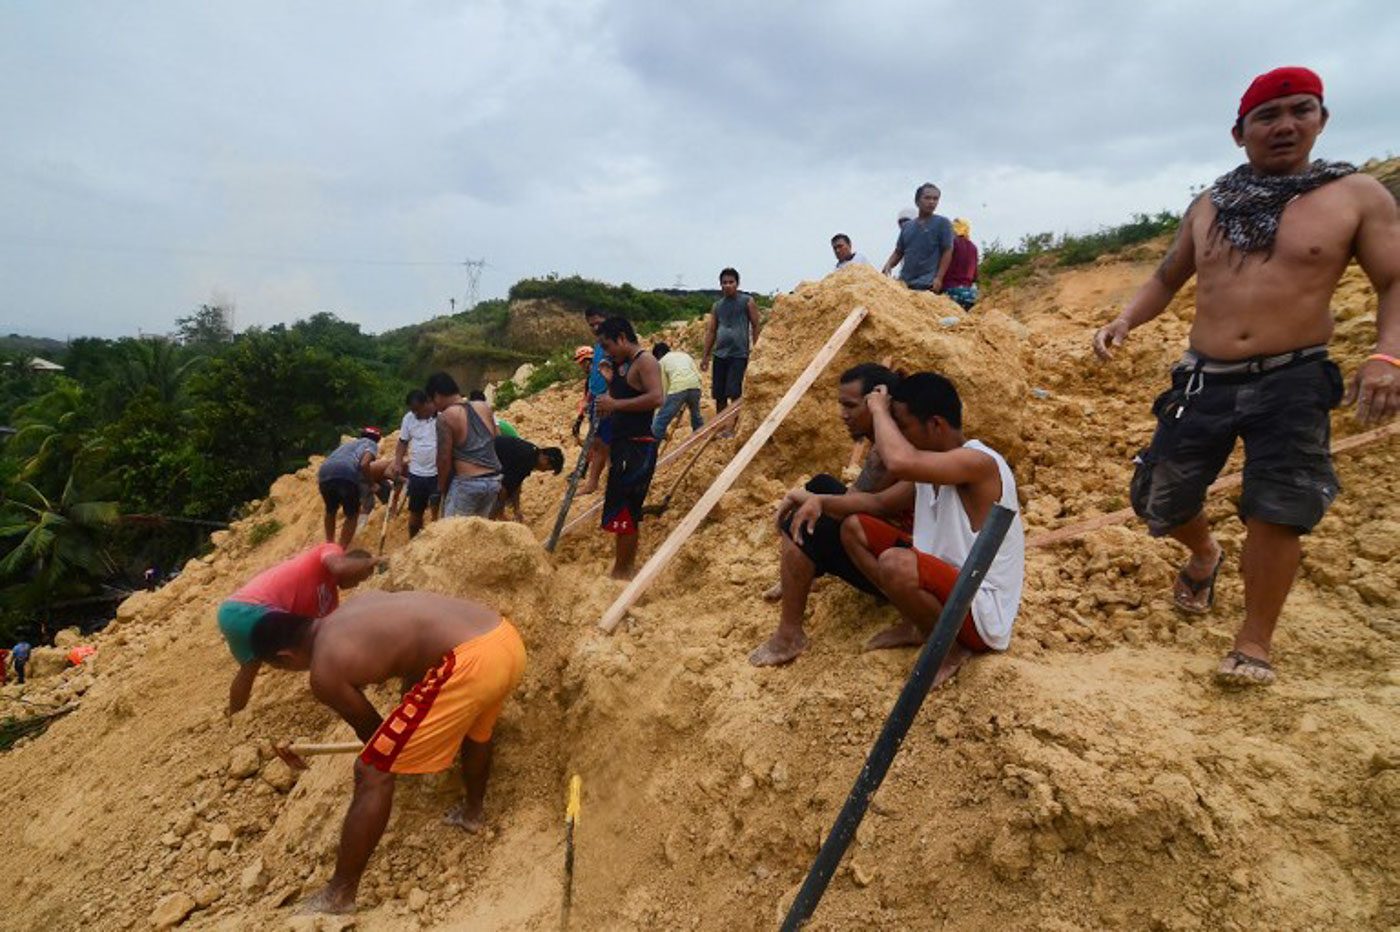 HELPING OUT. Residents help search for survivors at the landslide site in Naga City, on the popular tourist island of Cebu on September 20, 2018. Photo by Alan Tangcawan/AFP 